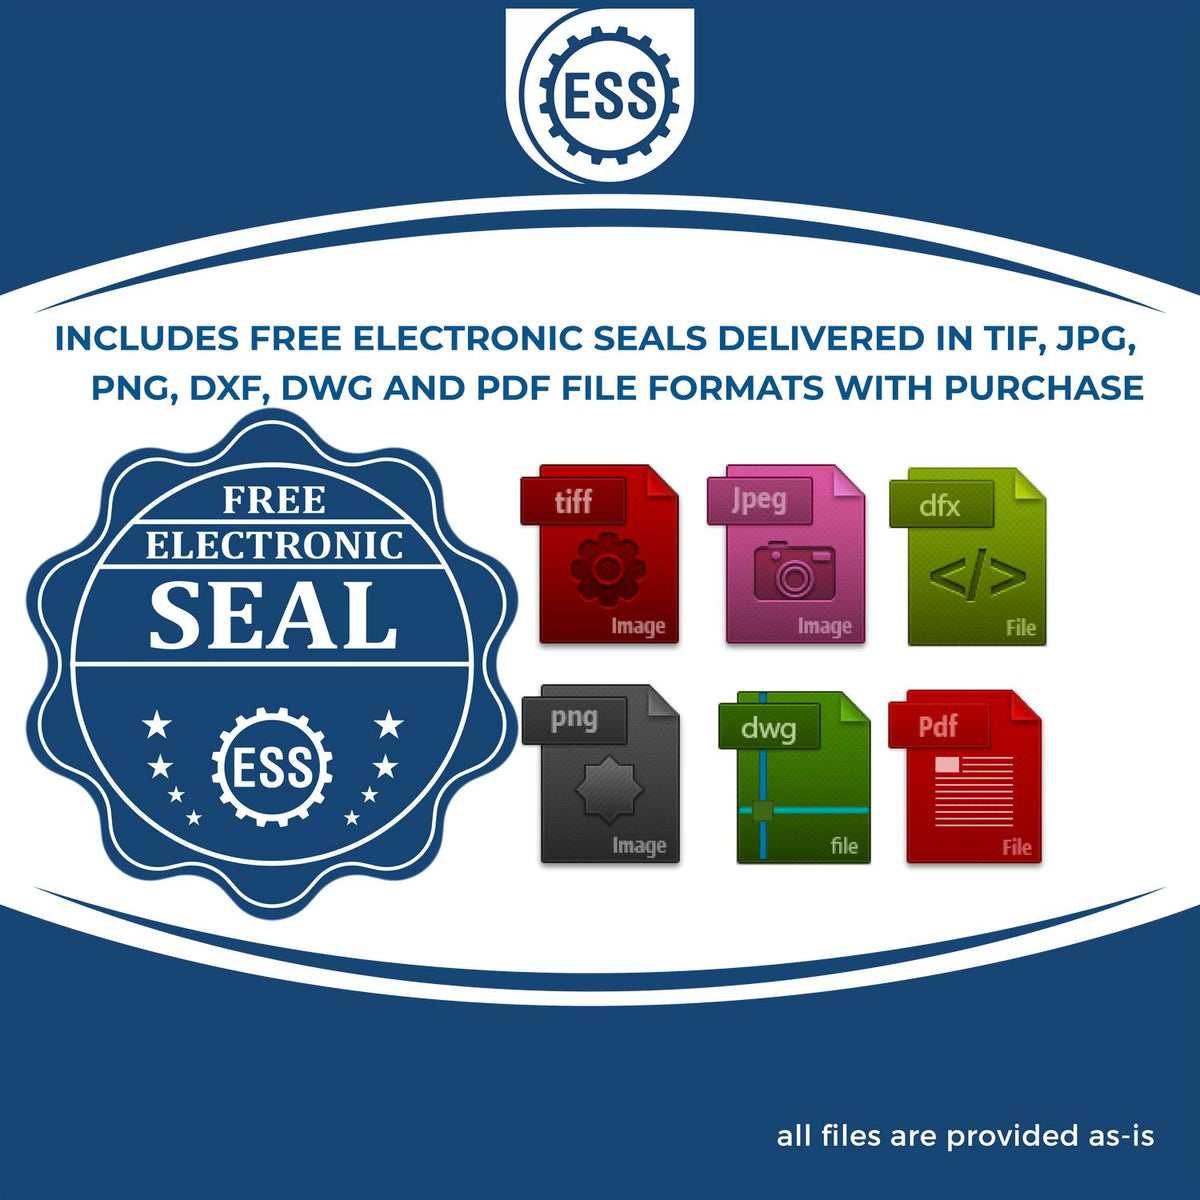 An infographic for the free electronic seal for the Heavy-Duty South Dakota Rectangular Notary Stamp illustrating the different file type icons such as DXF, DWG, TIF, JPG and PNG.